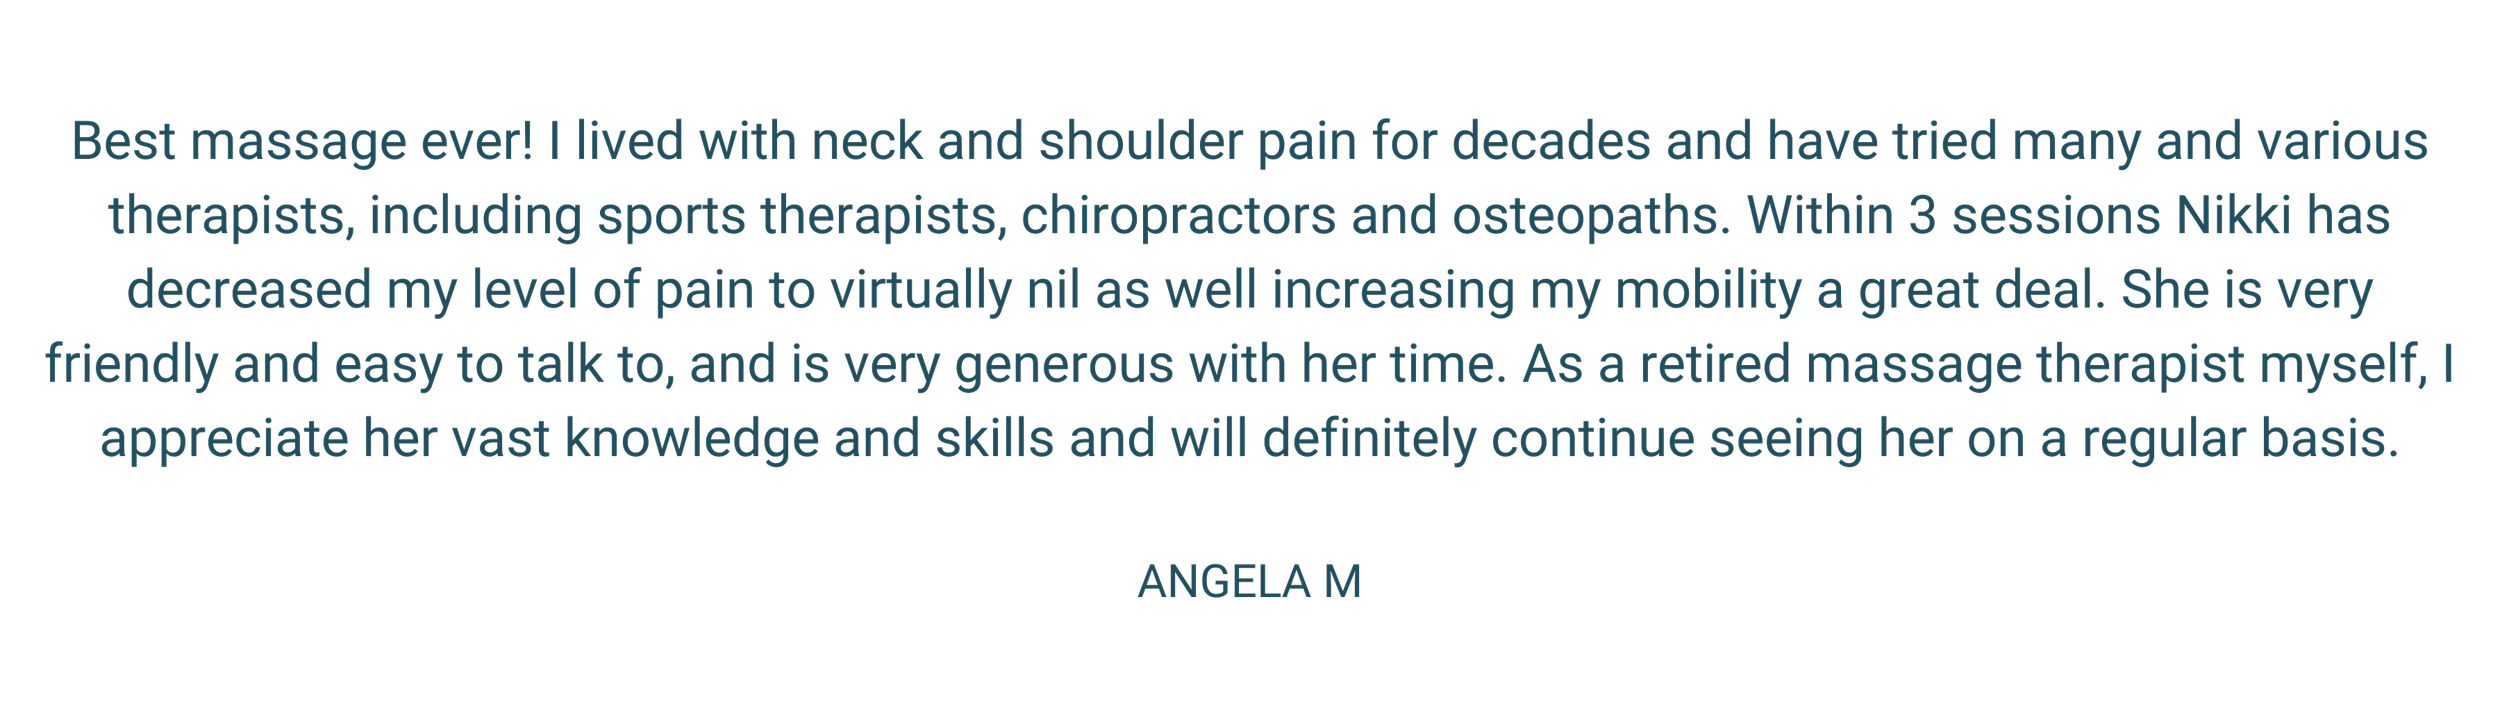 Best massage ever! I lived with neck and shoulder pain for decades and have tried many and various therapists, including sports therapists, chiropractors and osteopaths. Within 3 sessions Nikki has decreased my level.png